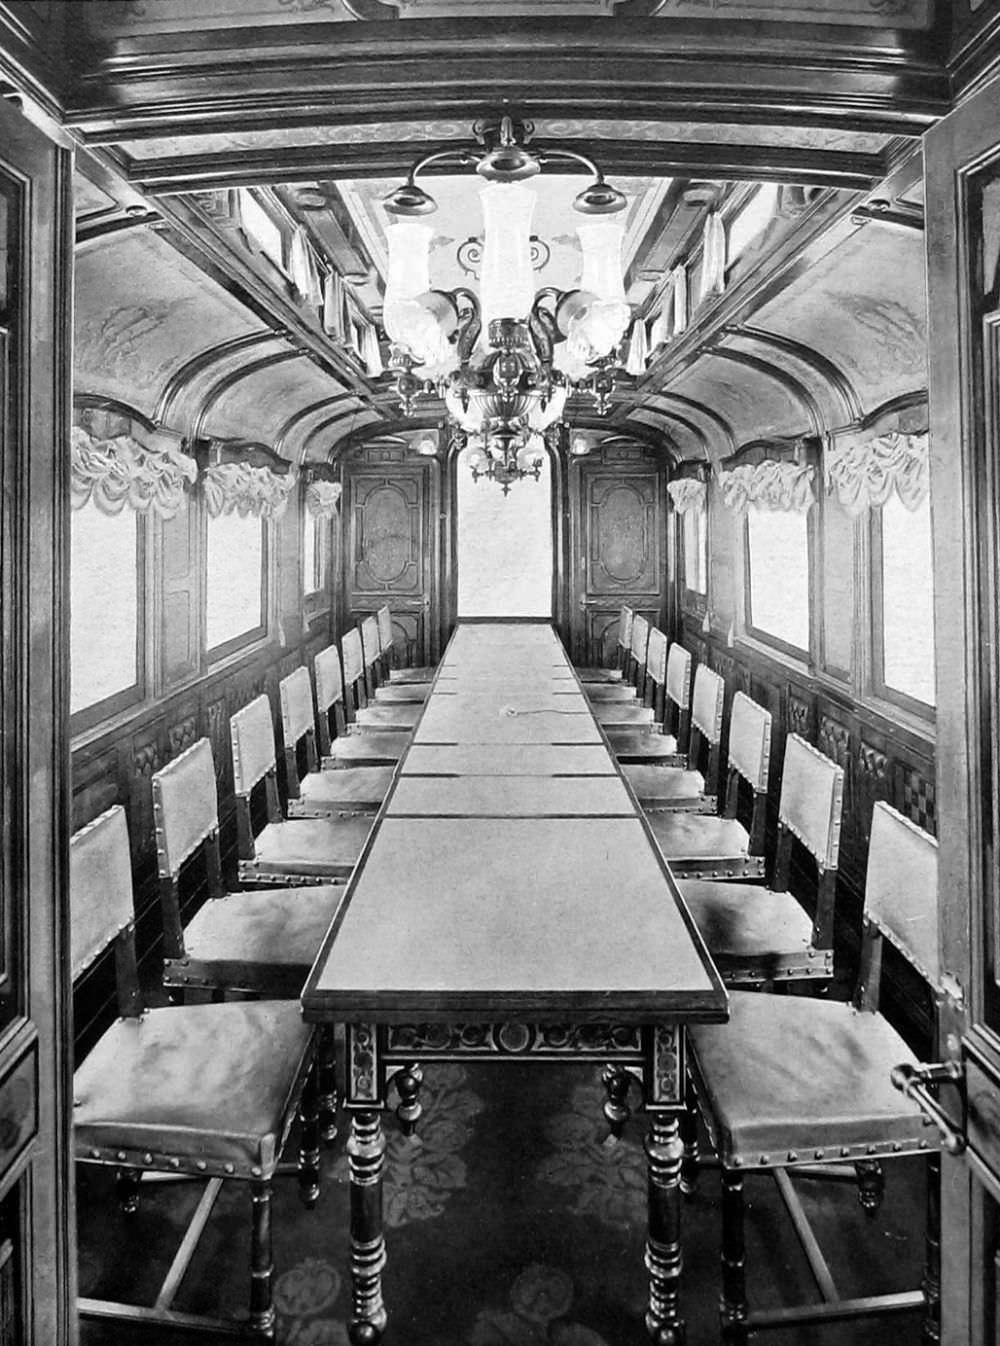 The dining-car.